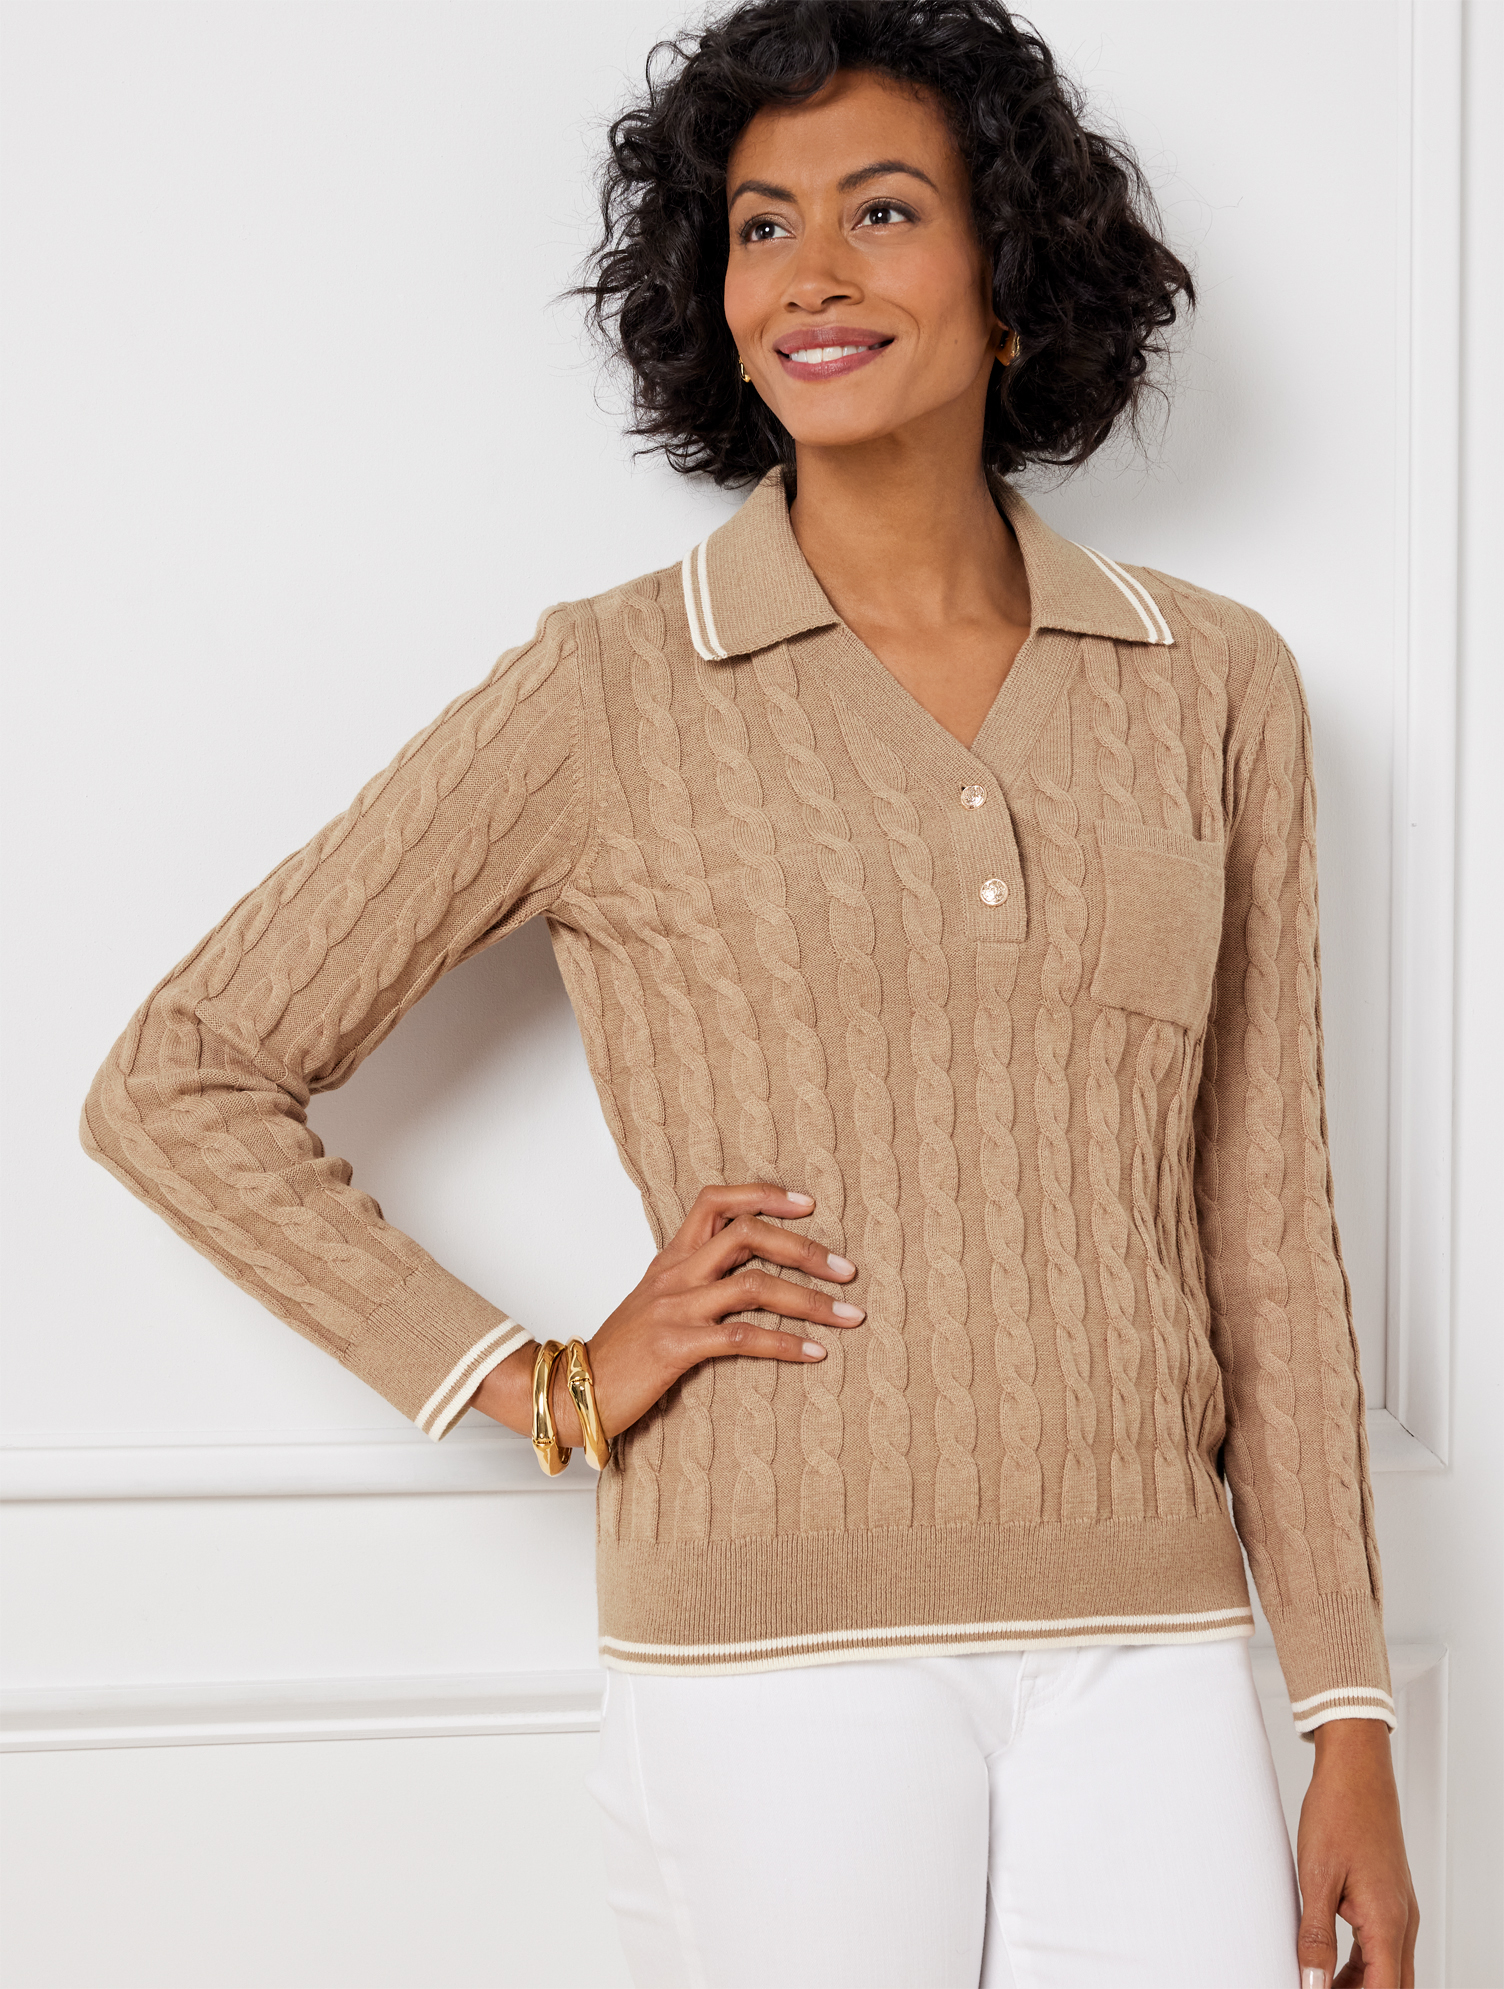 Talbots Johnny Collar Sweater - Tipped - Rattan/ivory - 3x  In Rattan,ivory